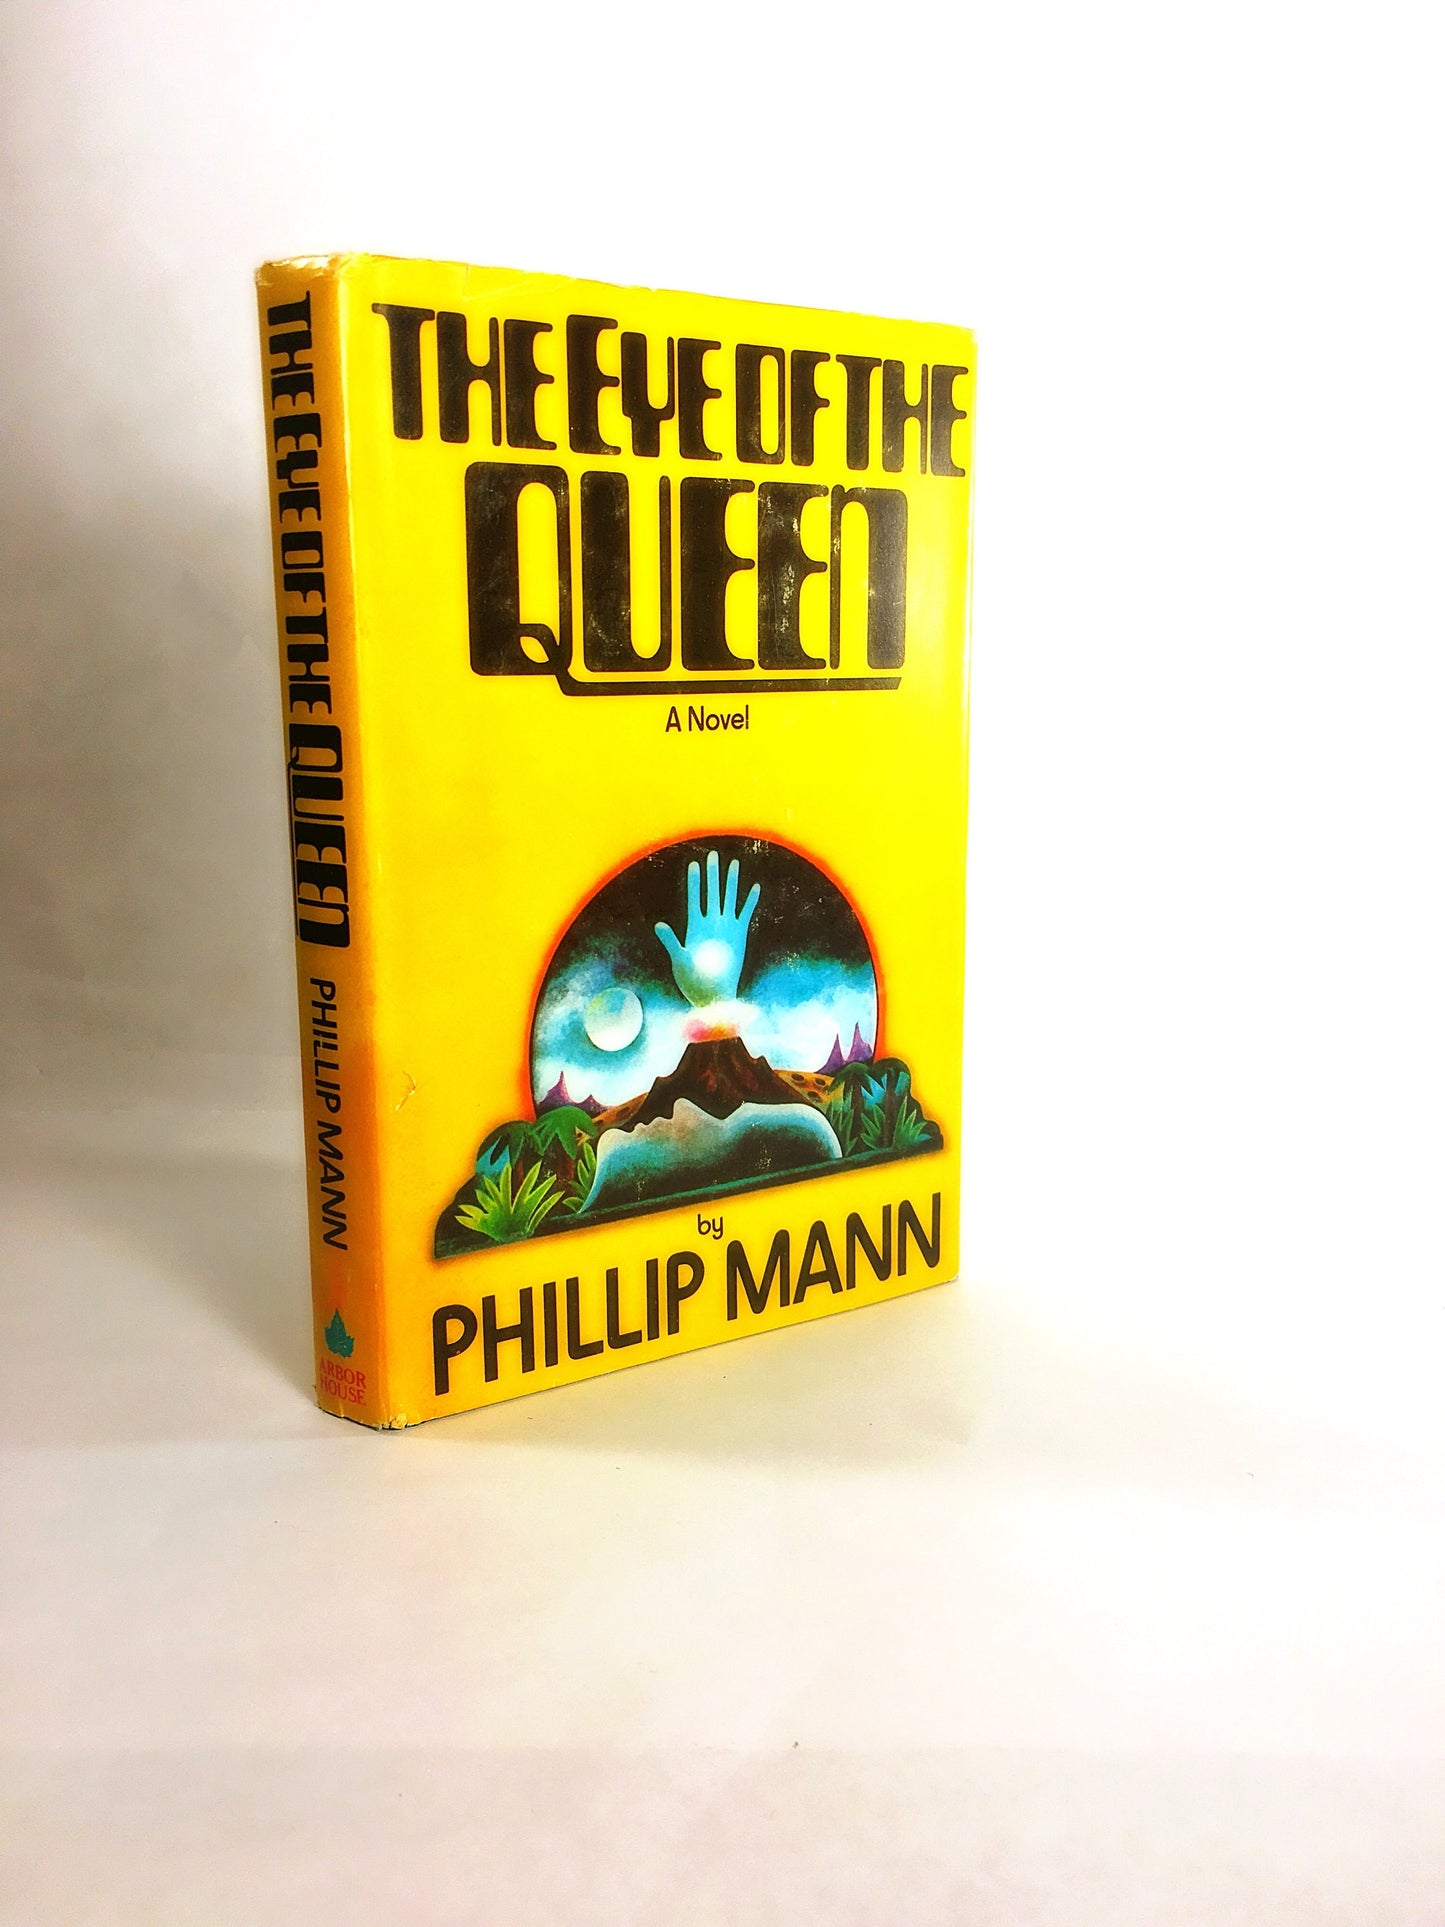 The Eye of the Queen by Phillip Mann - the creator of credible aliens. Vintage science fiction book circa 1983.